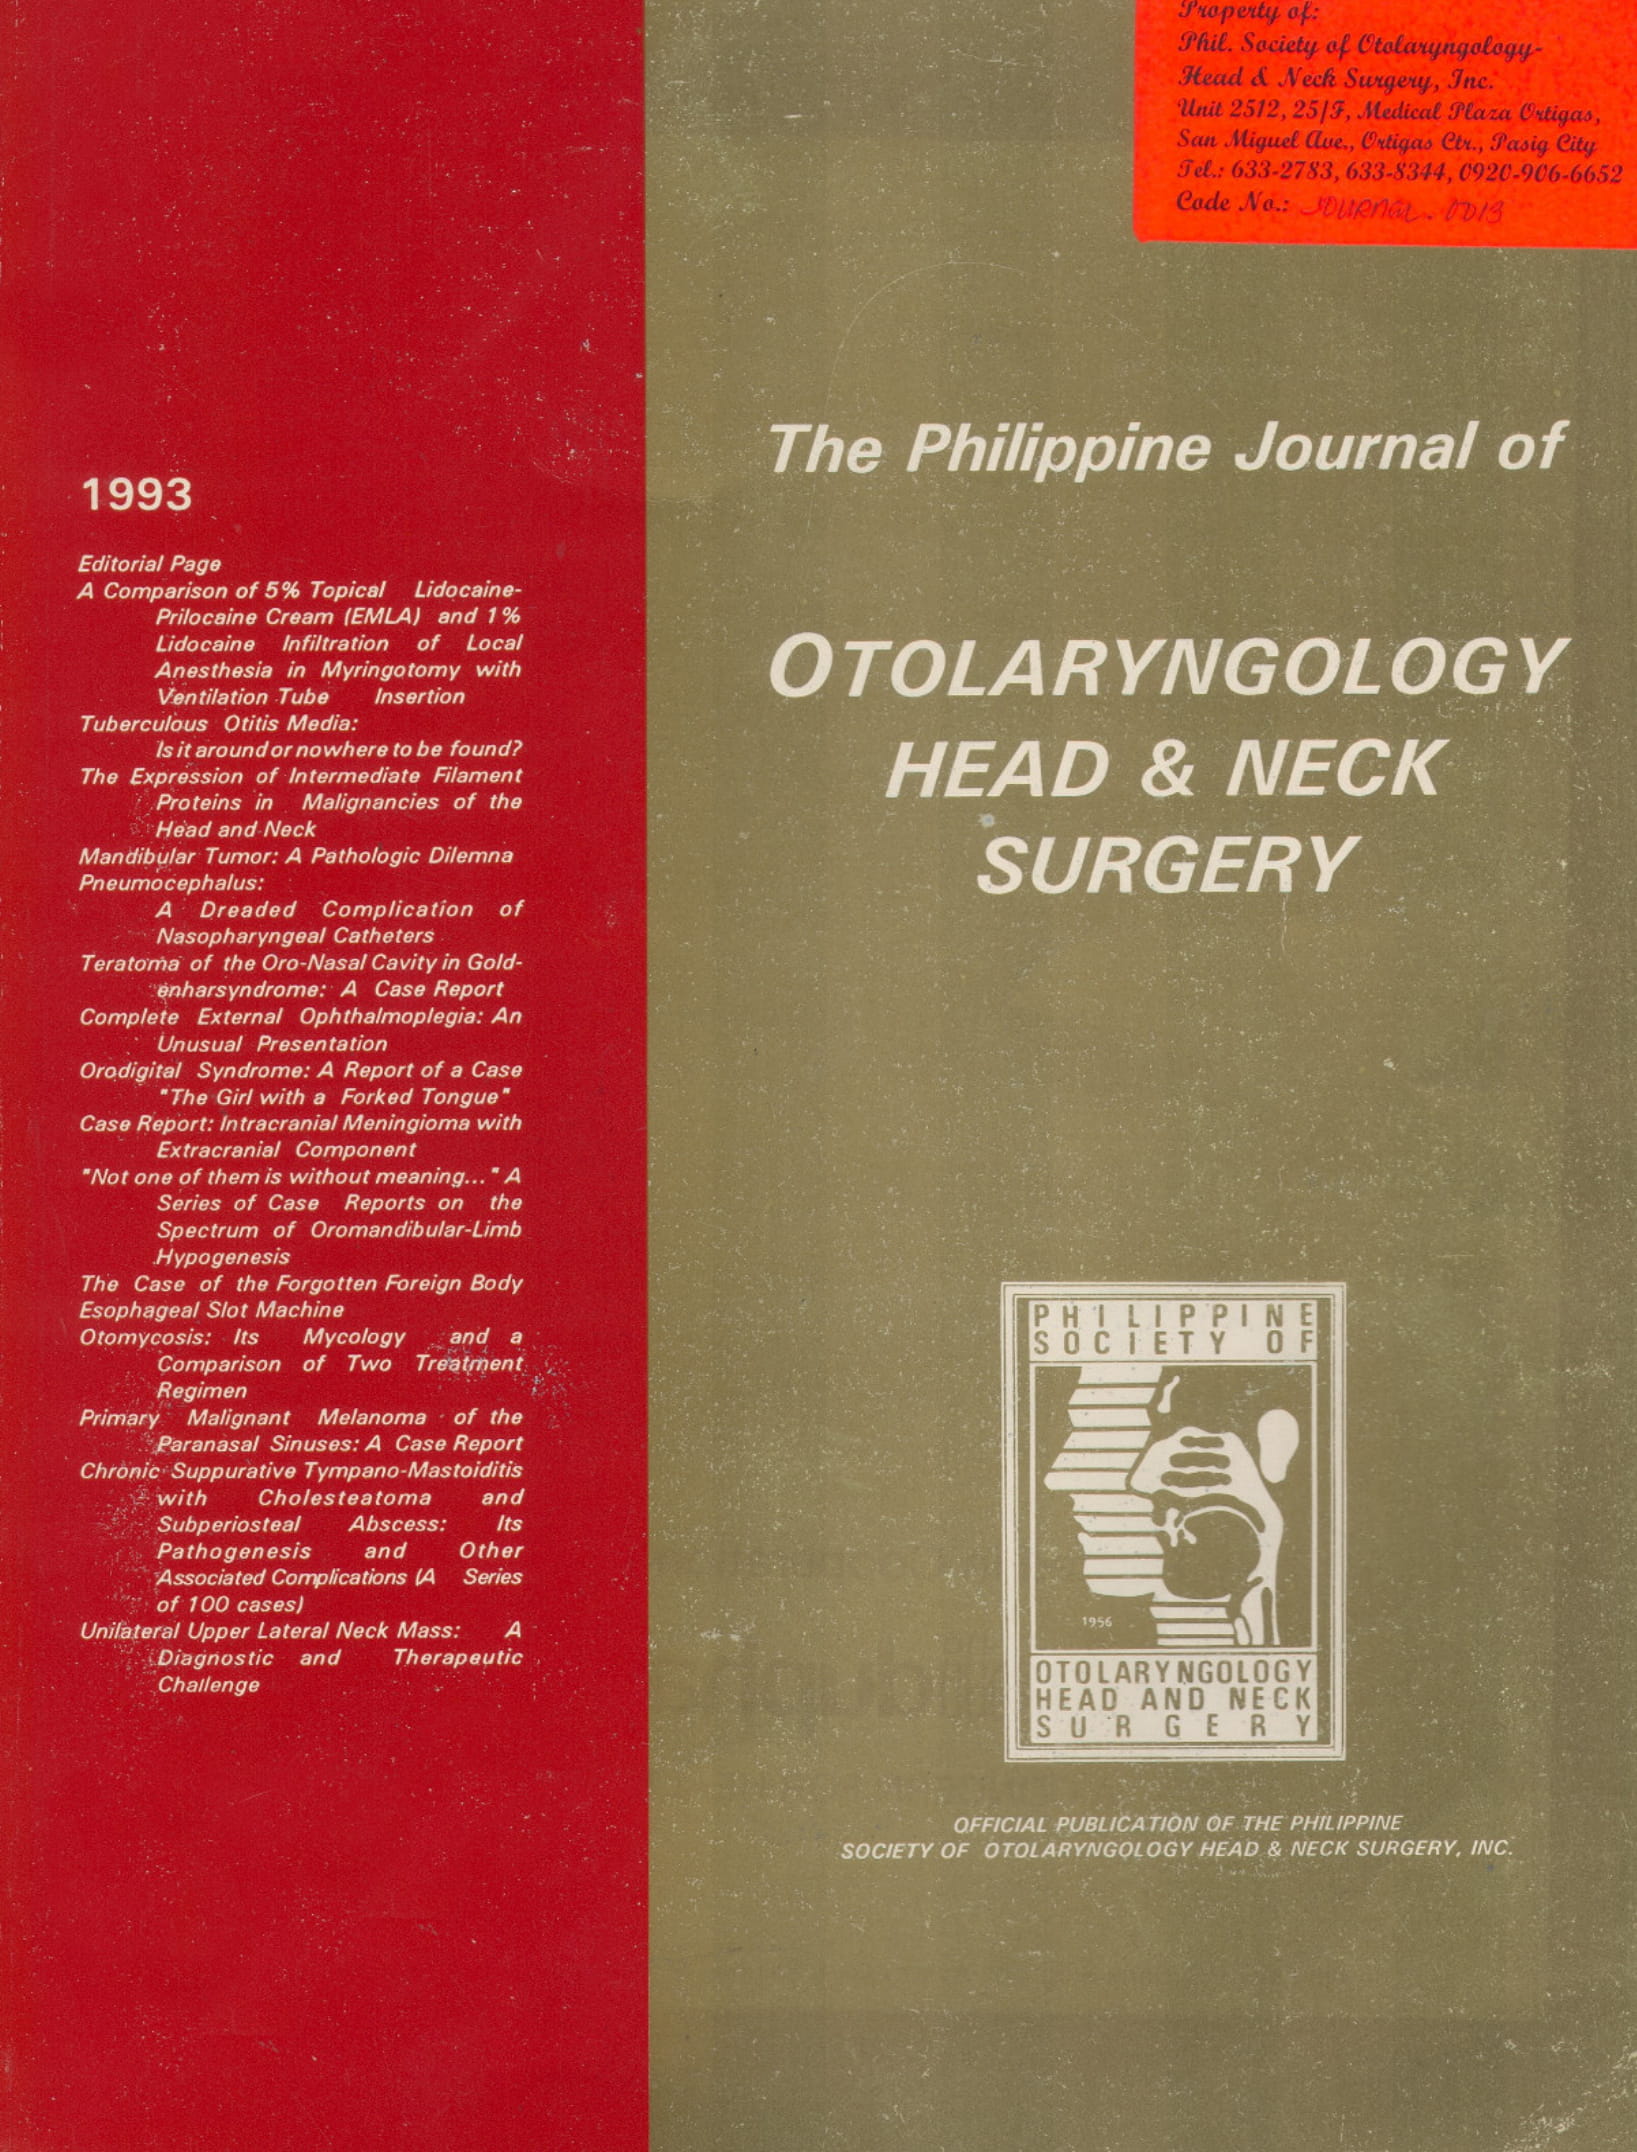 					View 1993: Philippine Journal of Otolaryngology-Head and Neck Surgery
				